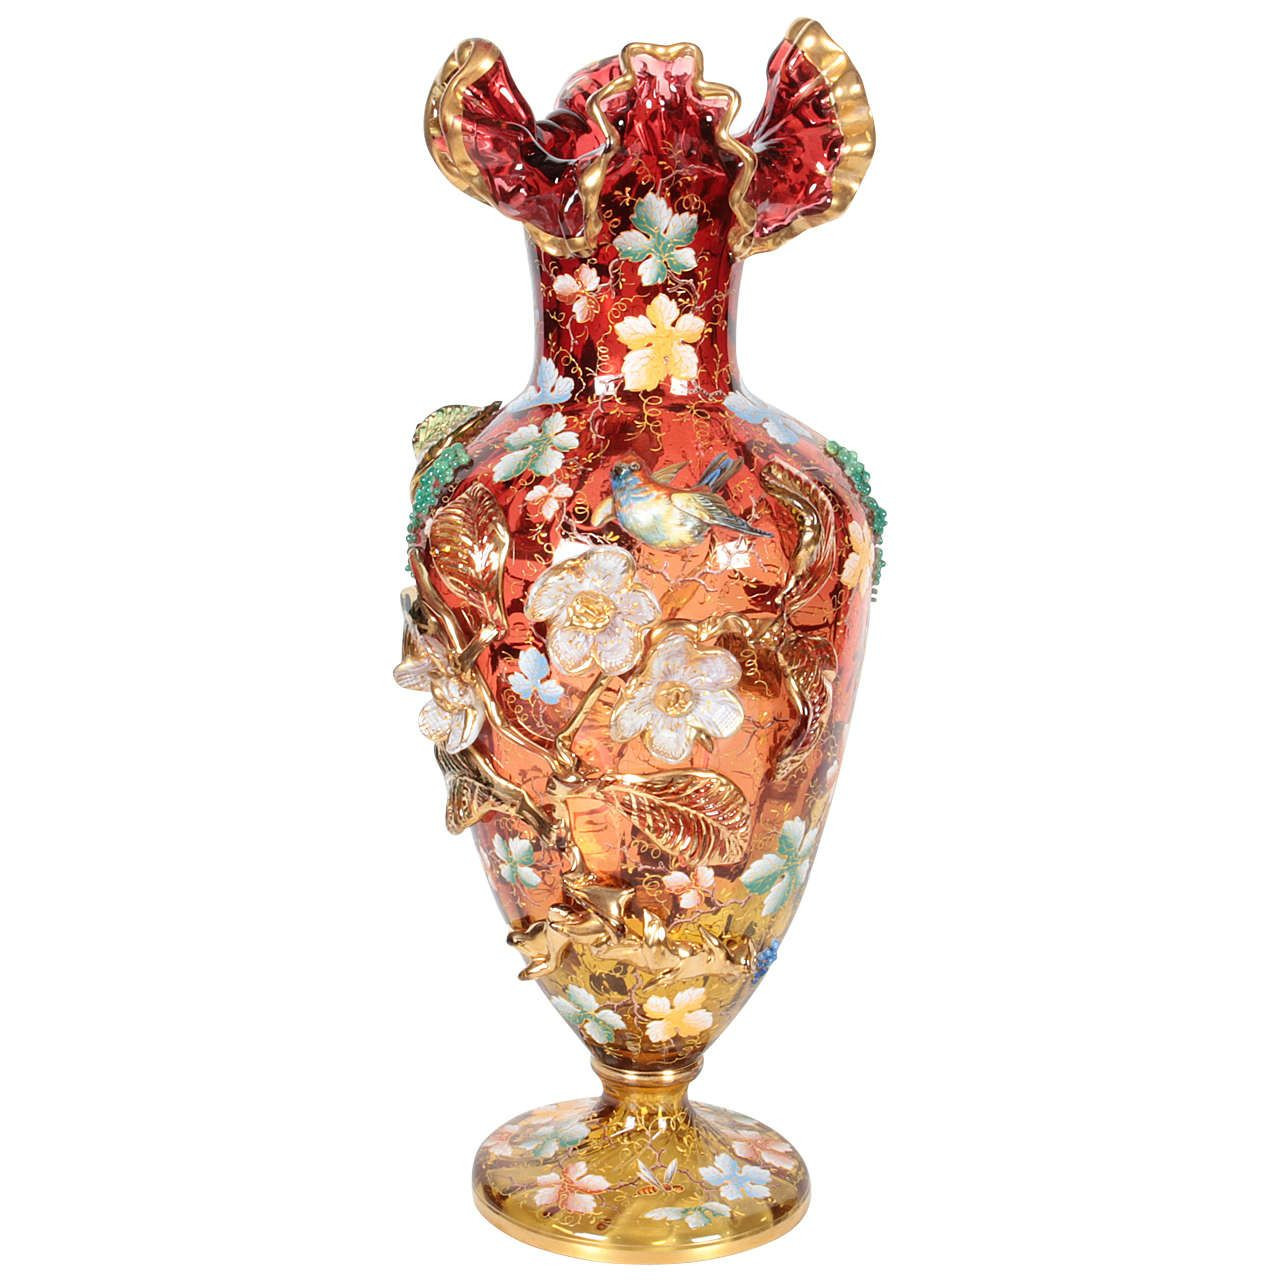 16 Lovely Amber Colored Vases 2022 free download amber colored vases of moser glass amberina red vase with raised flowers leaves jewels with regard to moser glass amberina red vase with raised flowers leaves jewels and bird from a unique c